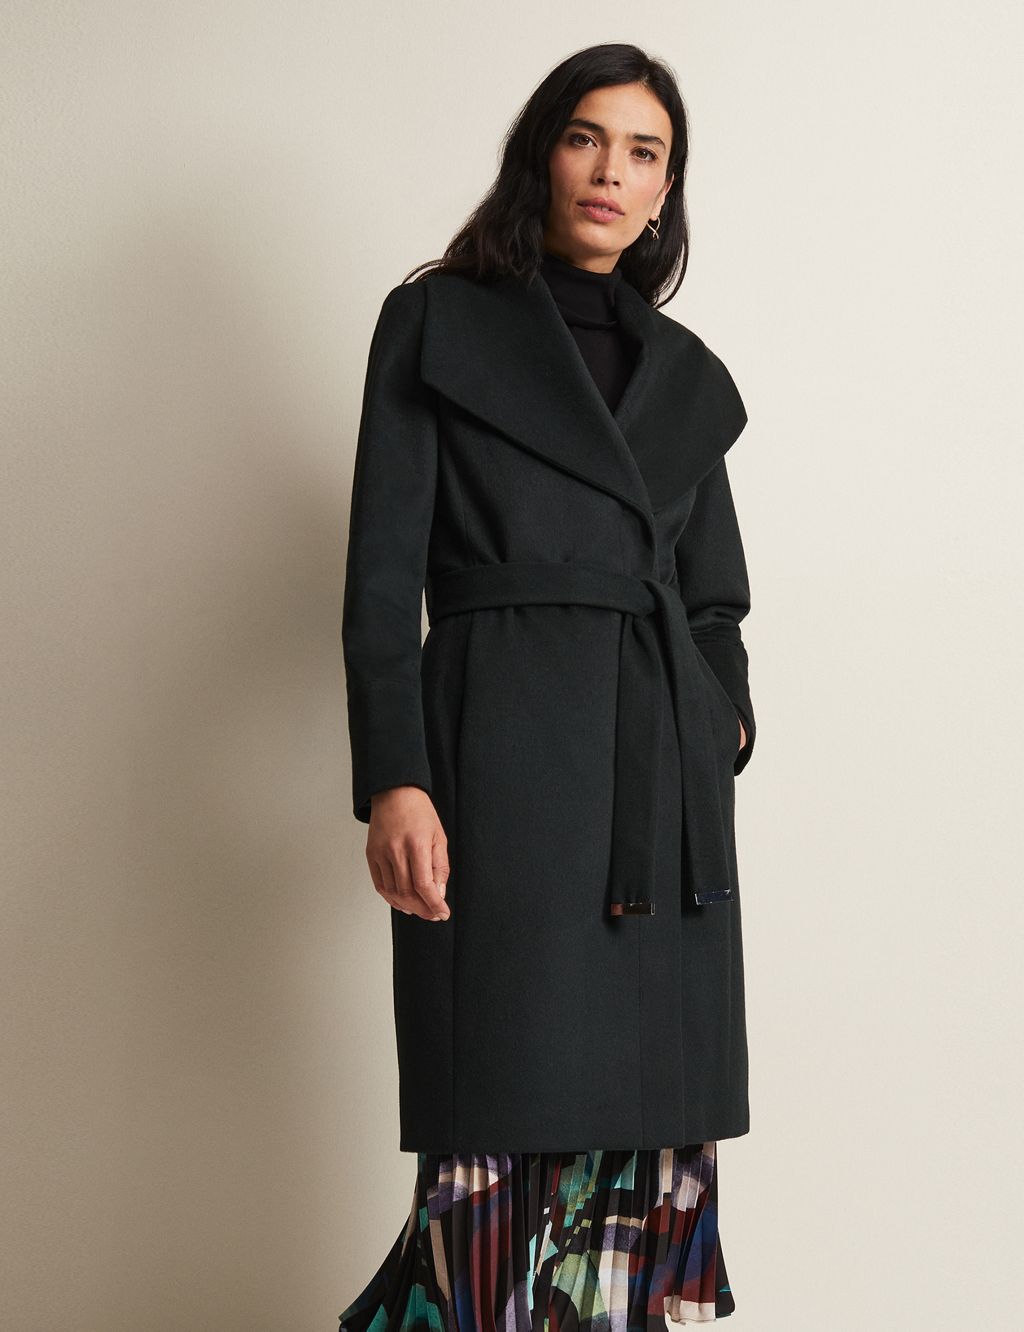 Wool Rich Belted Collared Wrap Coat image 1